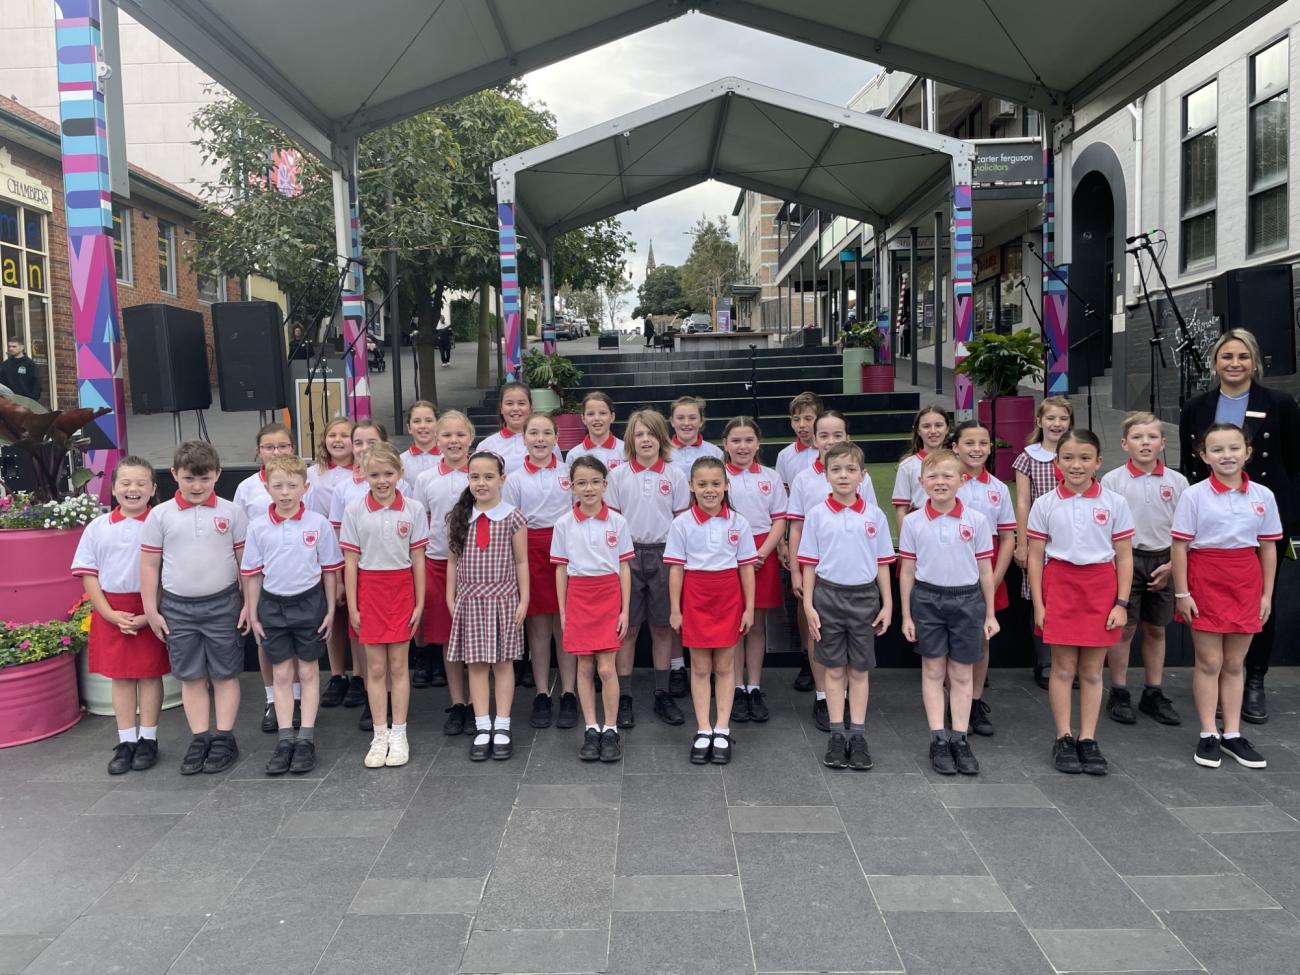 Figtree Public School Junior Choir standing in front of the stage in school uniform for photo